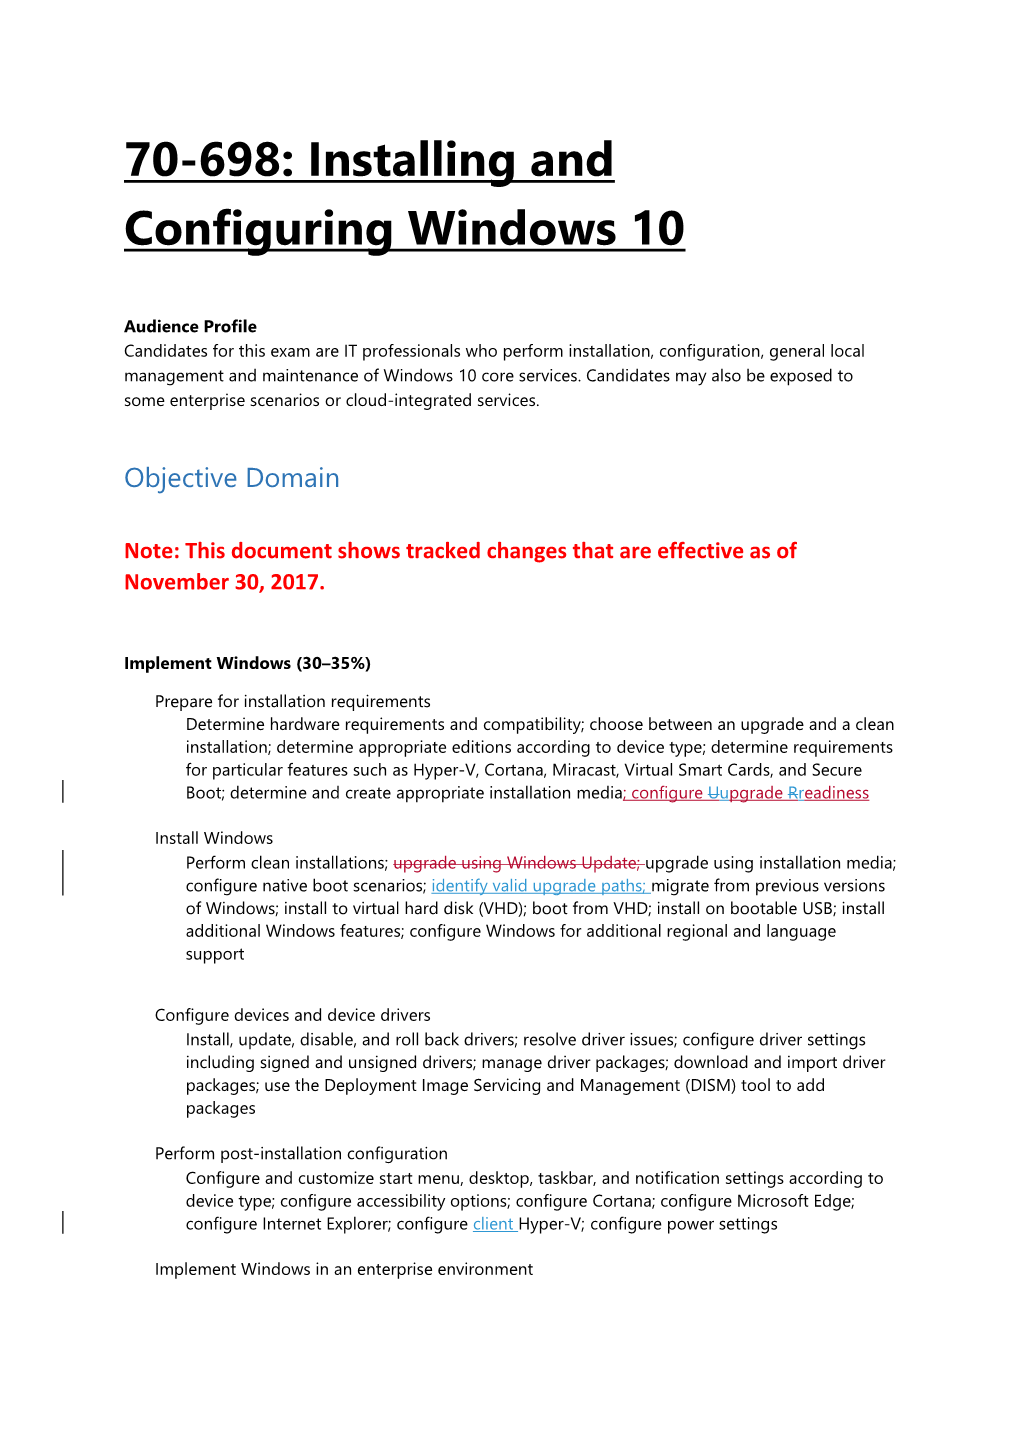 70-698: Installing and Configuring Windows 10